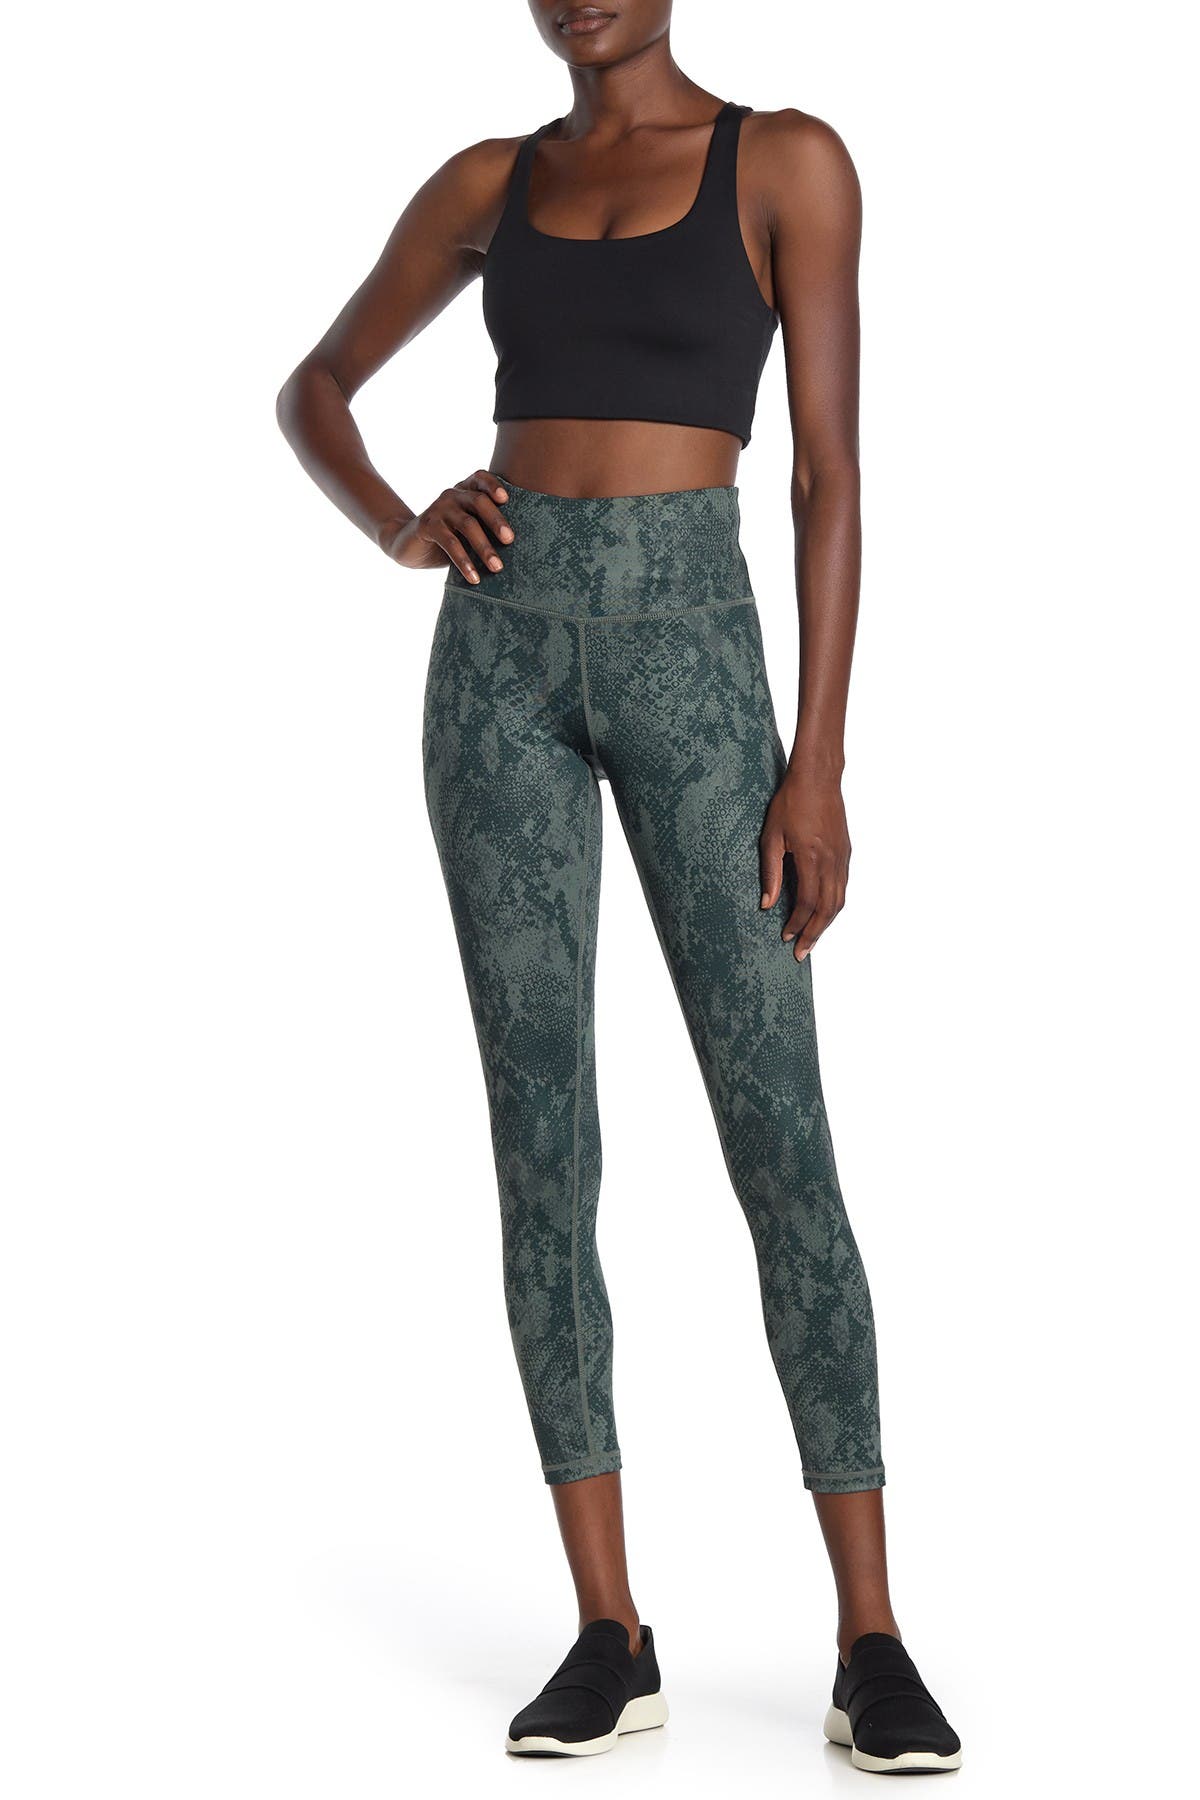 Are Zella Leggings Goodwill  International Society of Precision Agriculture